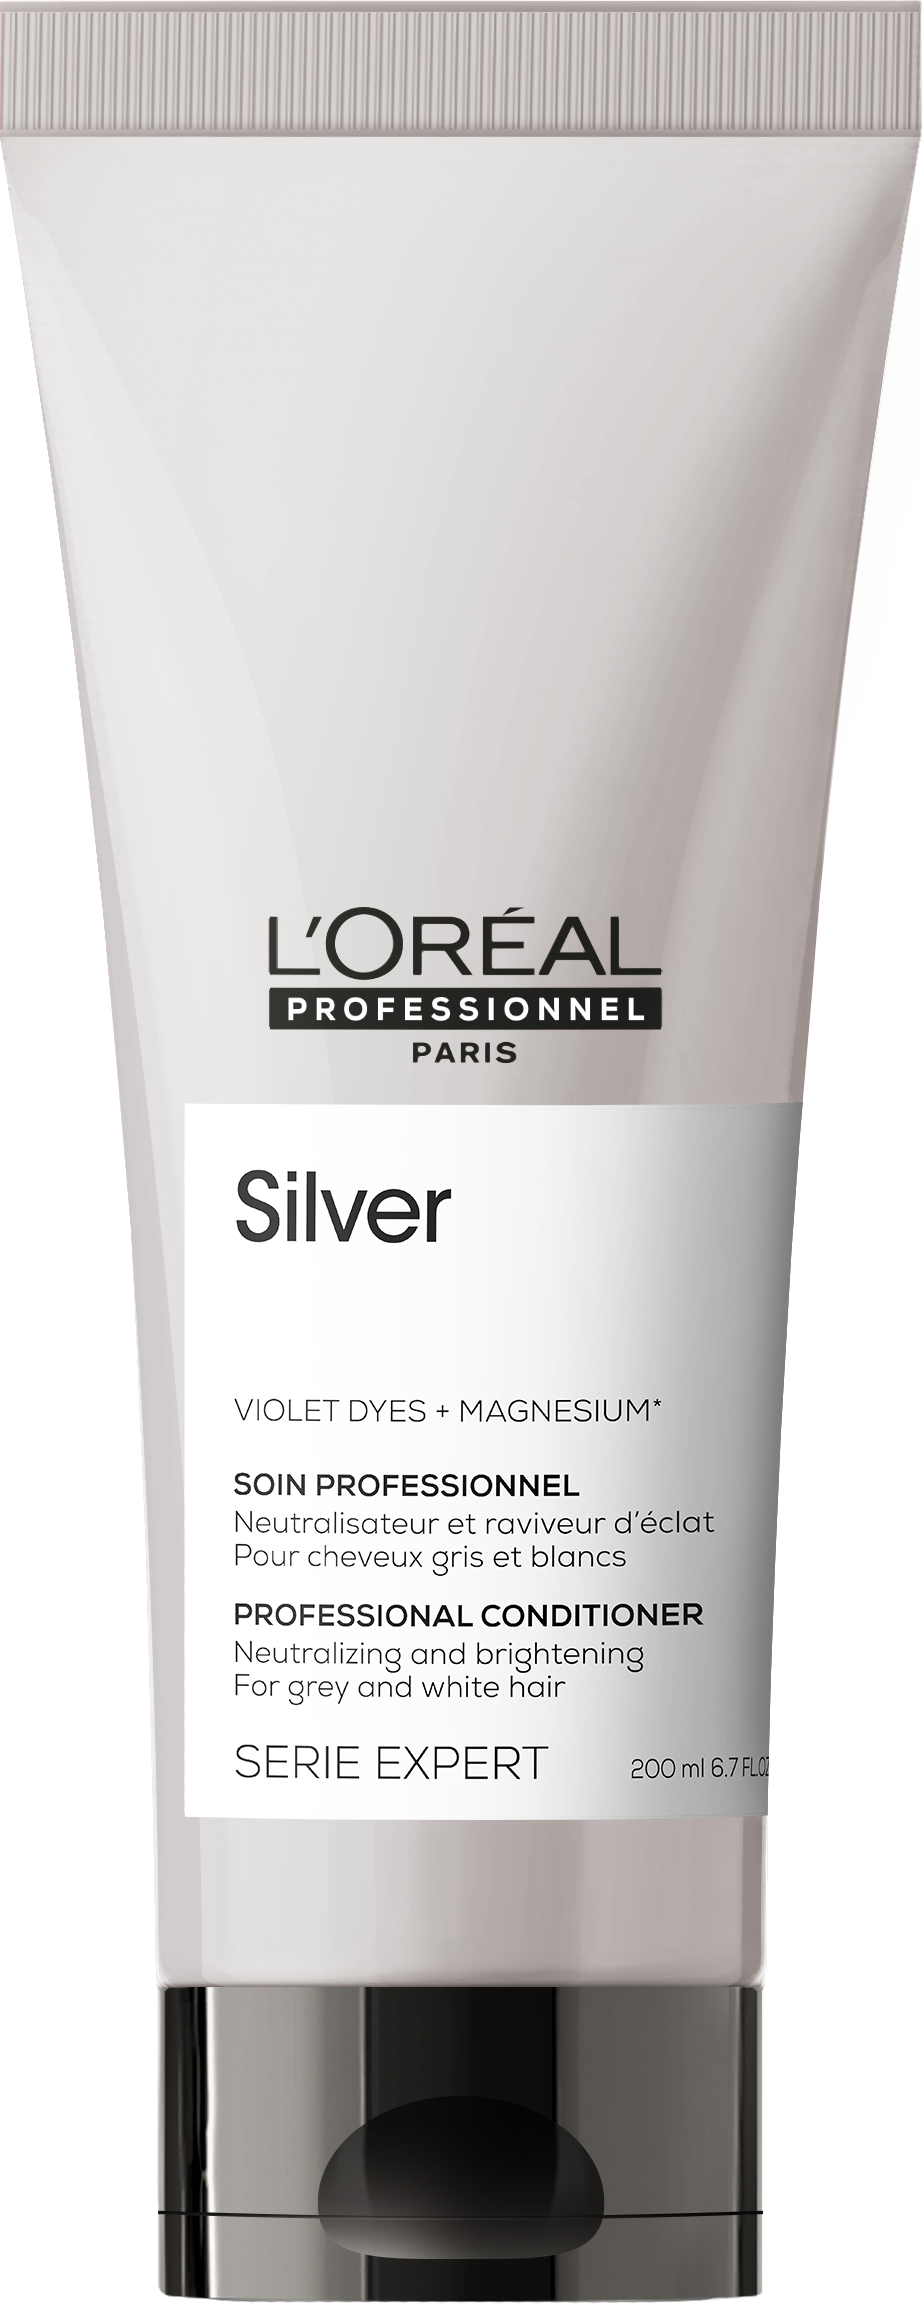 Loreal Silver Conditioner 200ml - Hair products New Zealand | Nation wide  hairdressing & hair care group